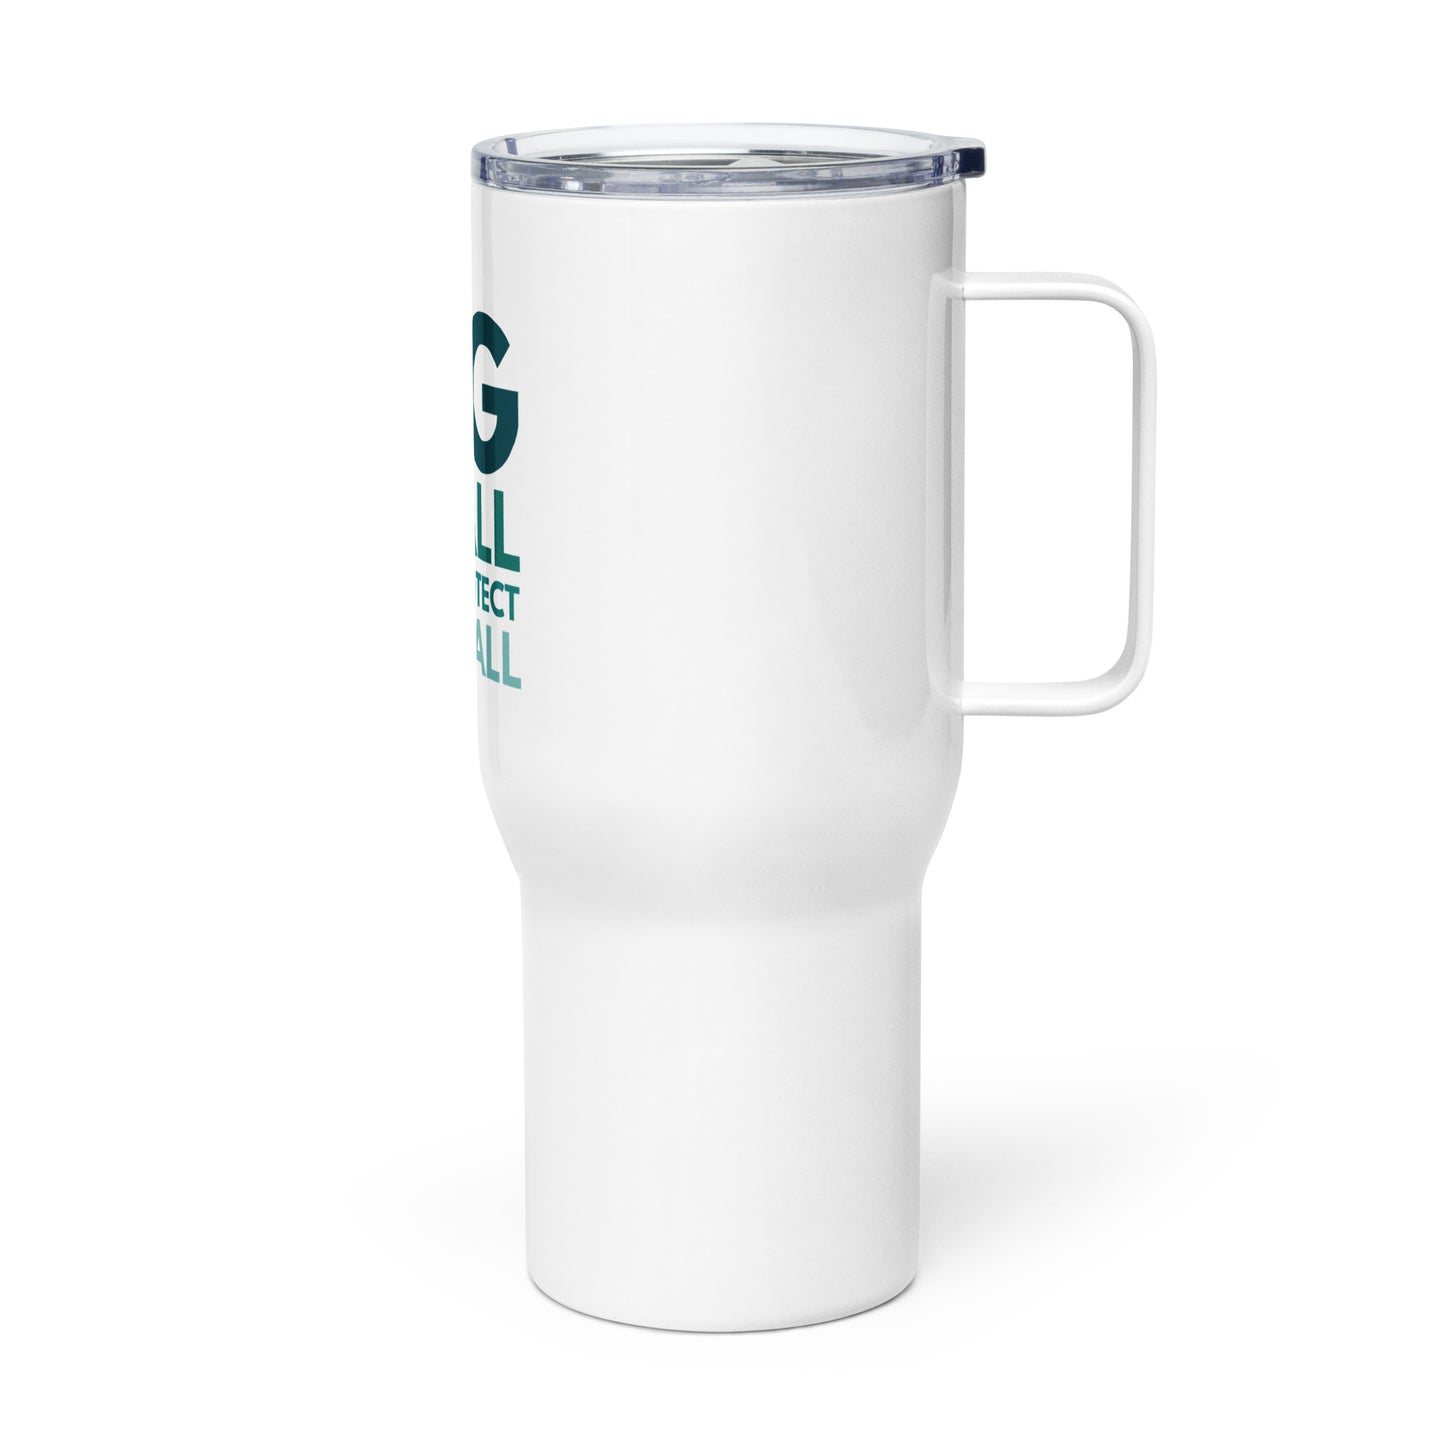 Big or Small, Let's Protect Them All - Travel mug with handle (25 oz)